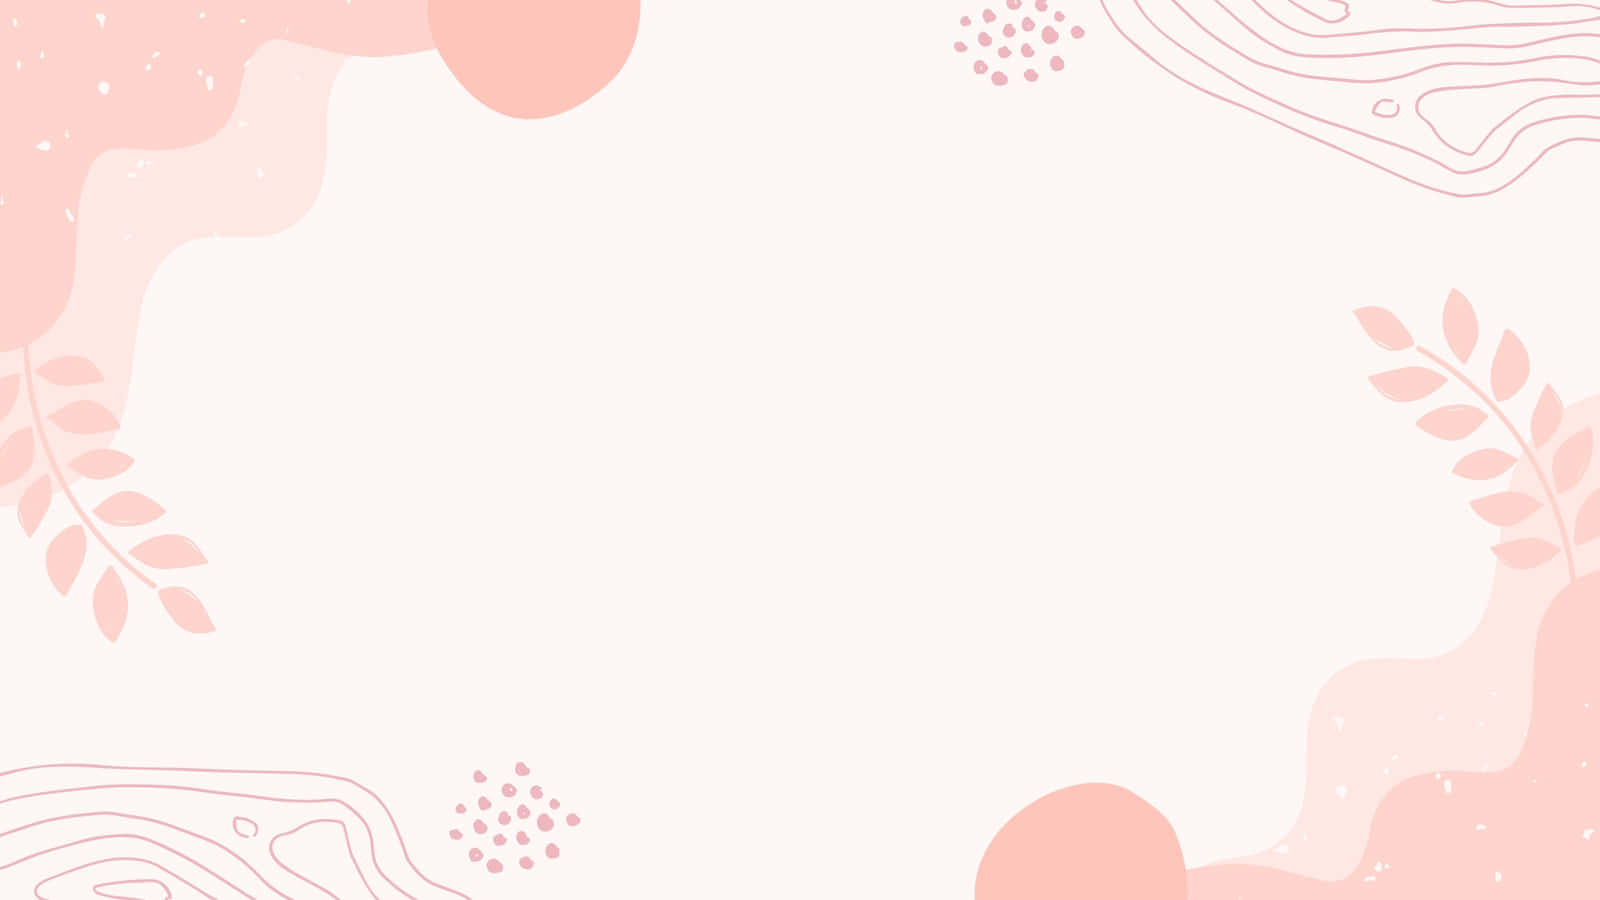 100+] Simple Pink Backgrounds